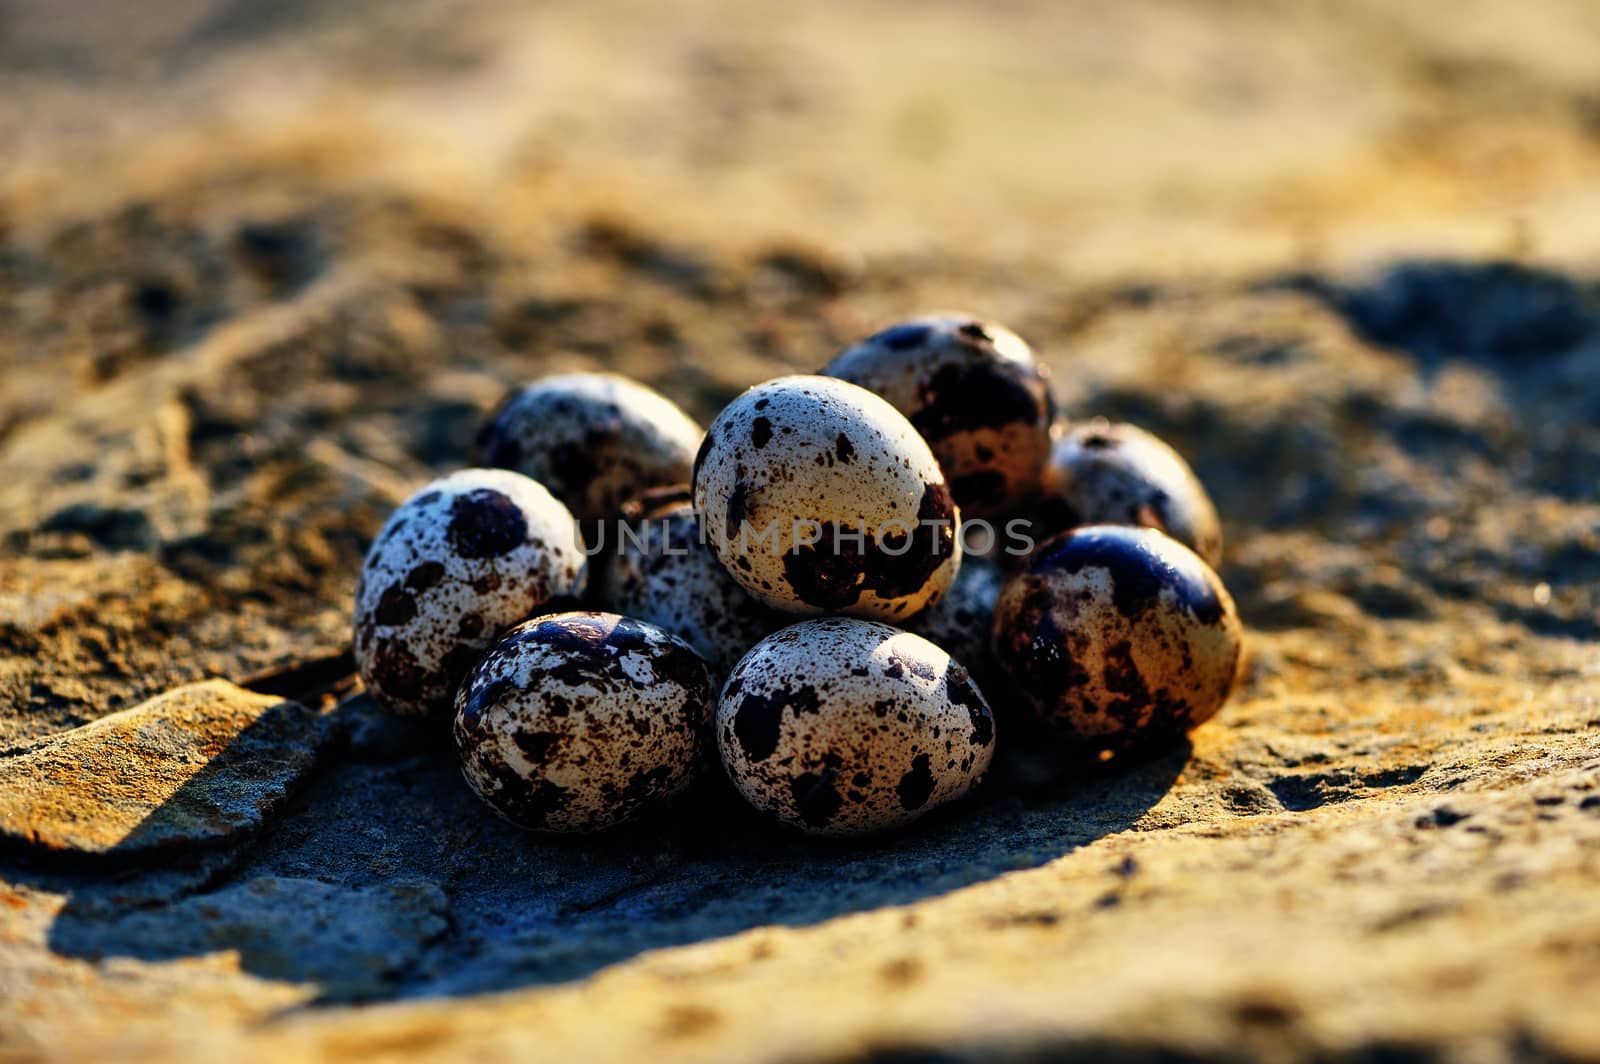 Quail eggs on the textured stone surface